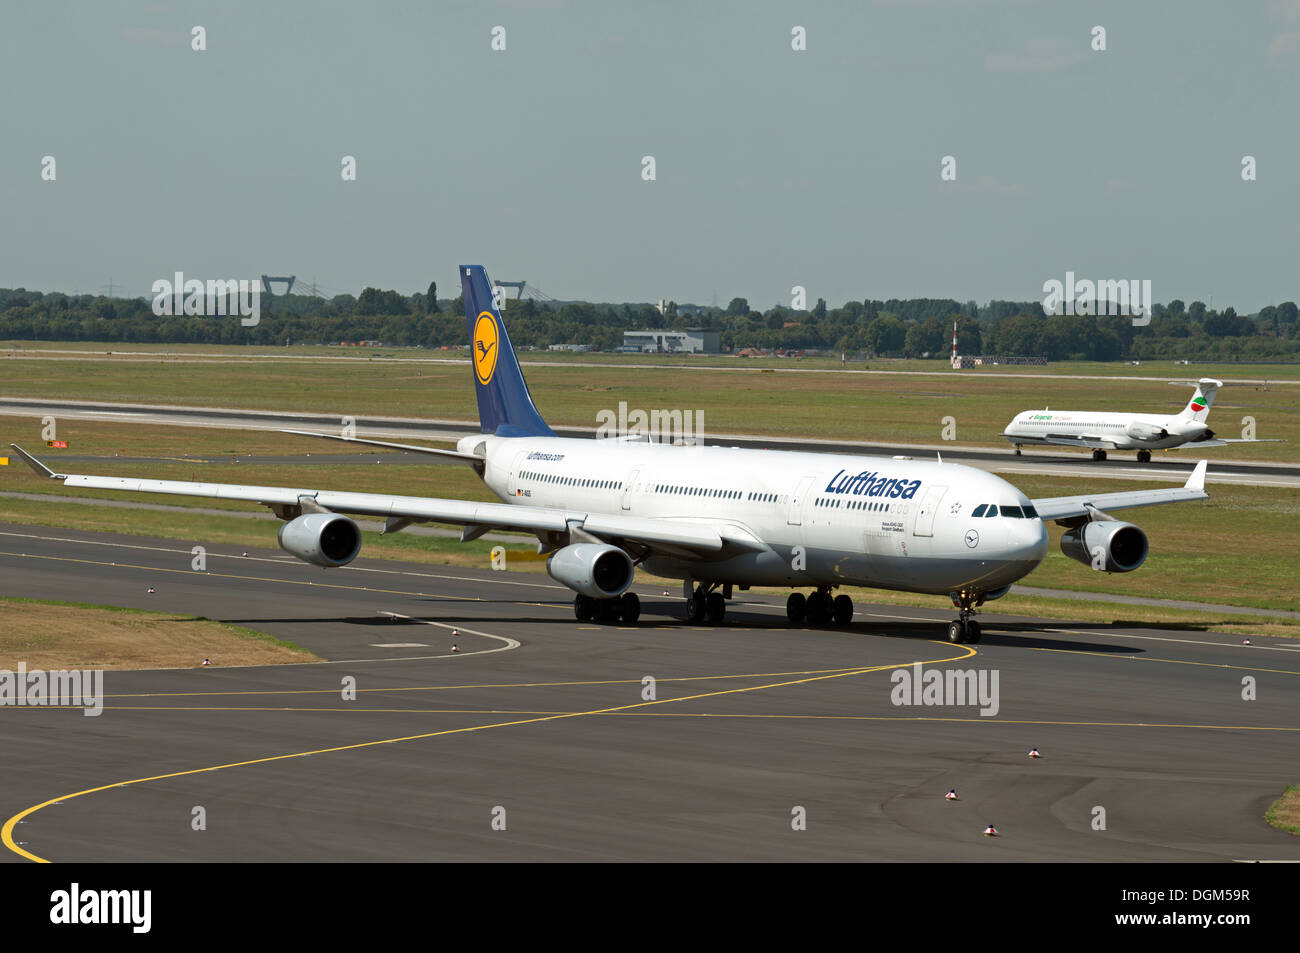 Lufthansa Airbus A340-300 taxiing to the runway at Dusseldorf International airport Stock Photo